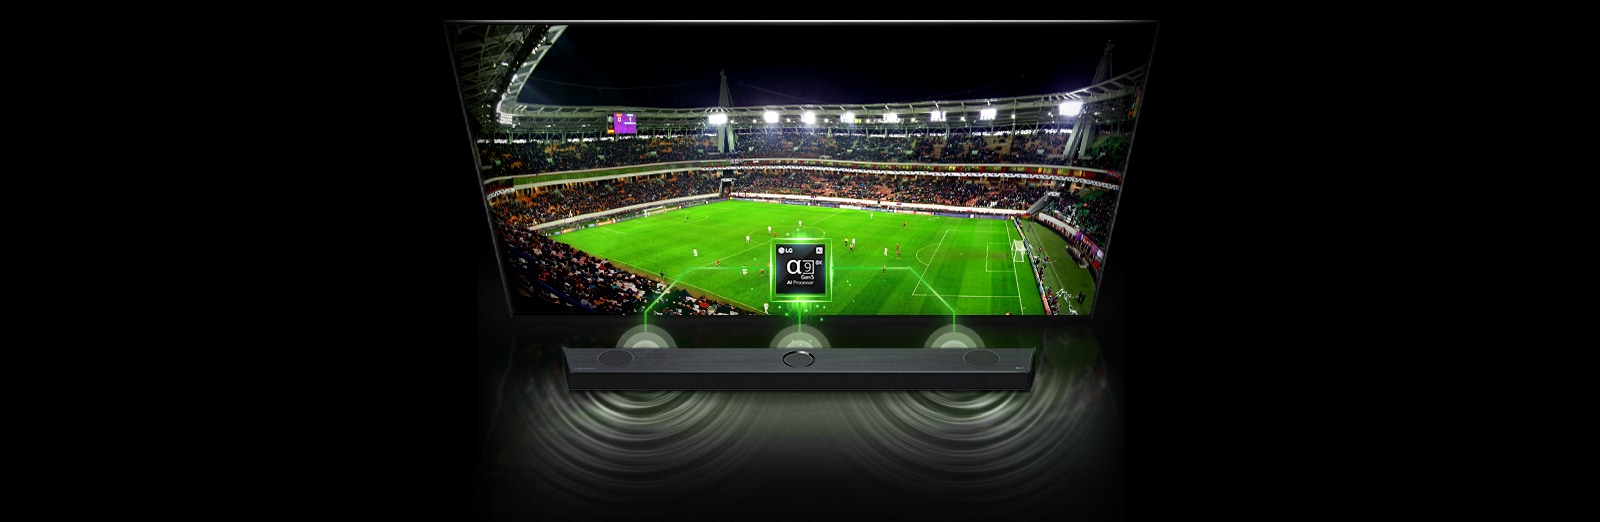 There is an image of 'Alpha 9 Chip' on the TV and a sound bar just below it. And on TV, the screen of the soccer stadium, the woman walking on the sunset beach, and the concert hall are shown one after another, and on the sound bar, the sound wave effect and color change according to the screen.